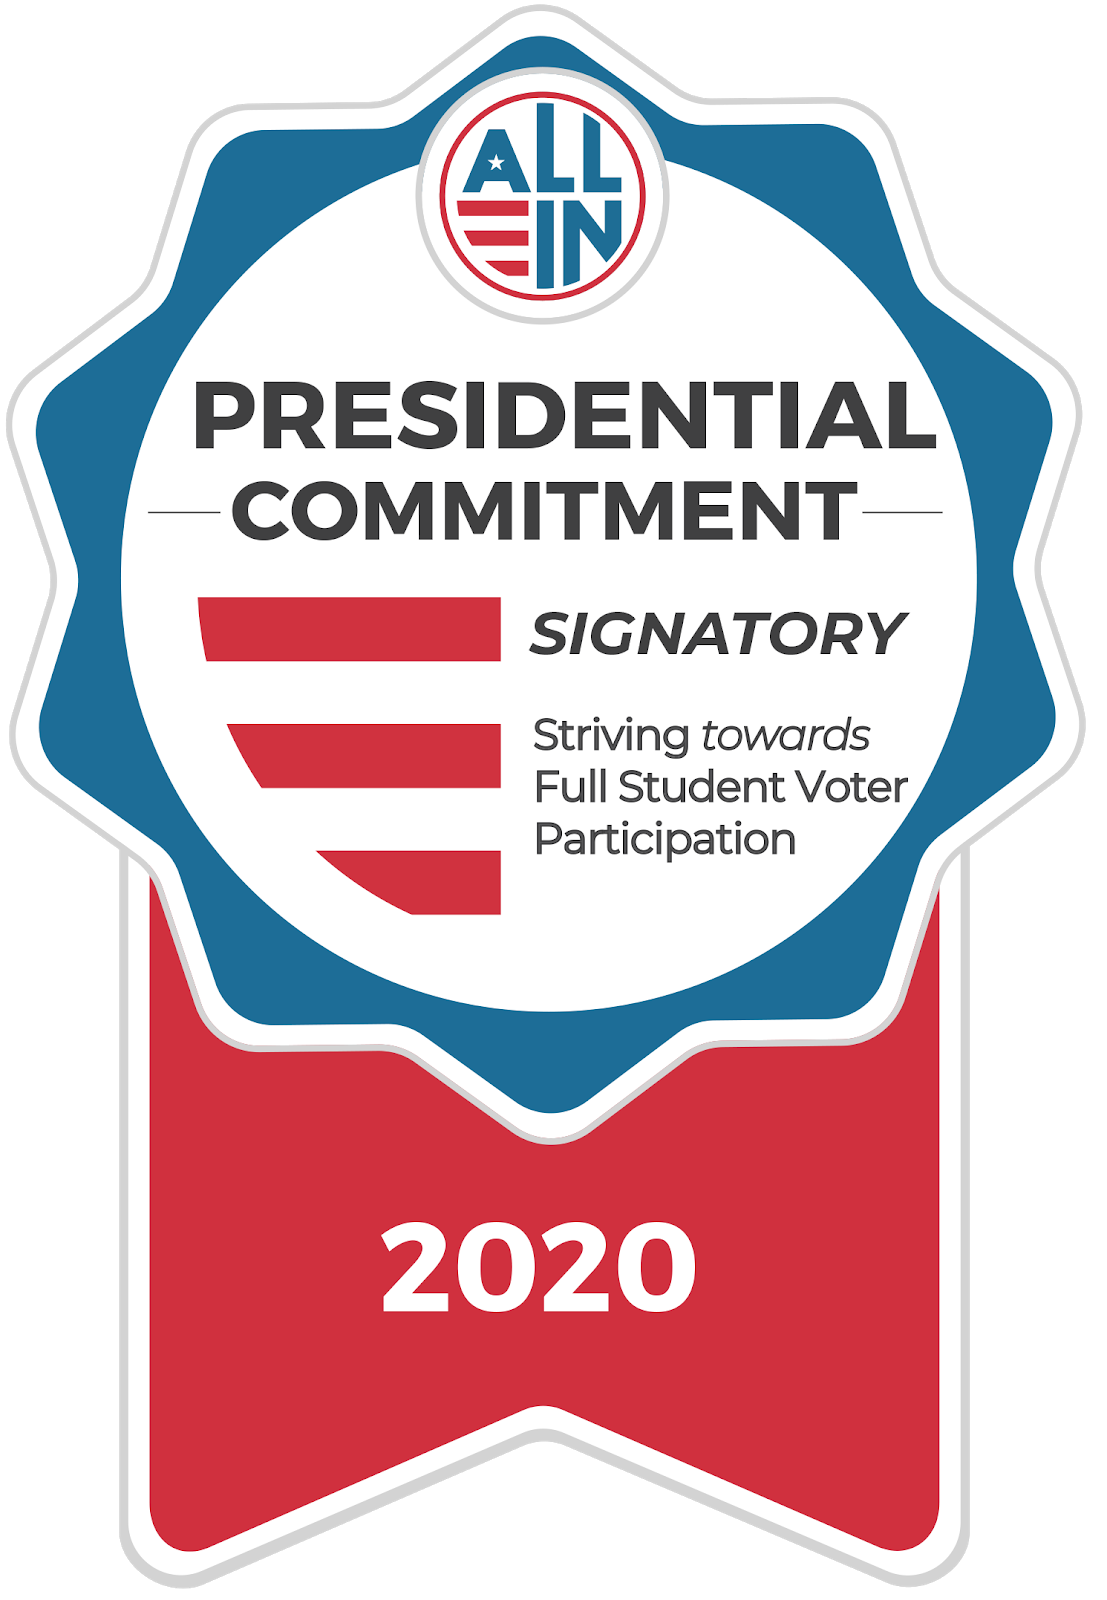 blue ribbon with the words: ALL IN Presidential Commitment Signatory Striving towards full student voter participation 2020